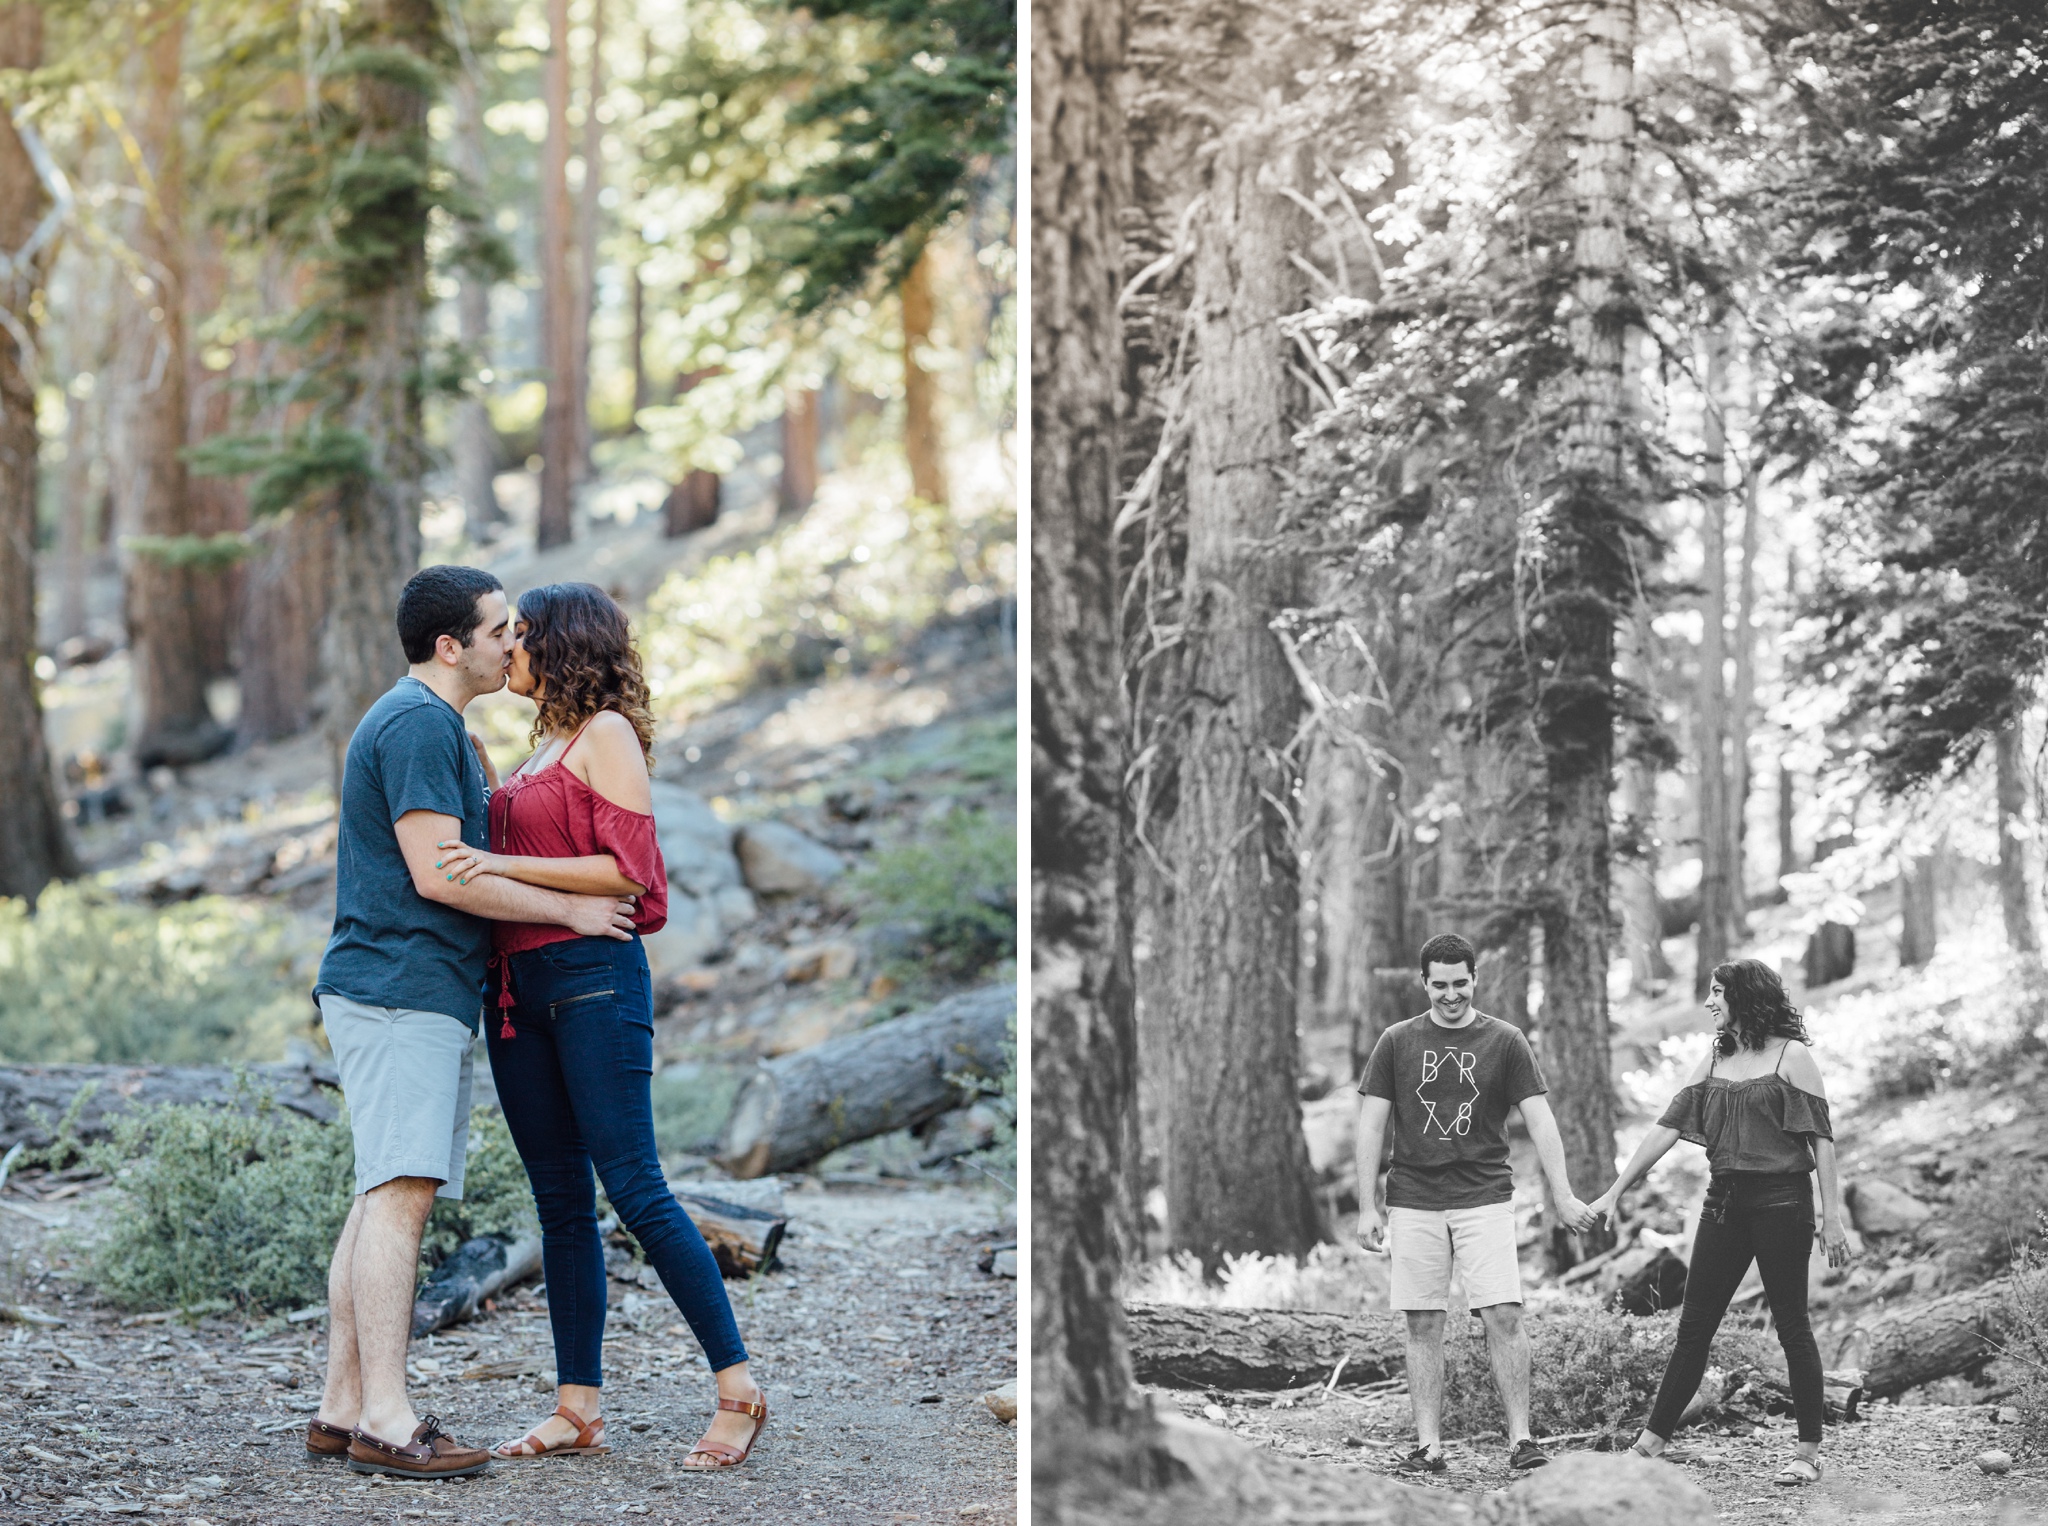 thedelauras_ostaraphotography_laketahoeengagement_laketahoeweddingphotograph_laketahoe_photographer_004